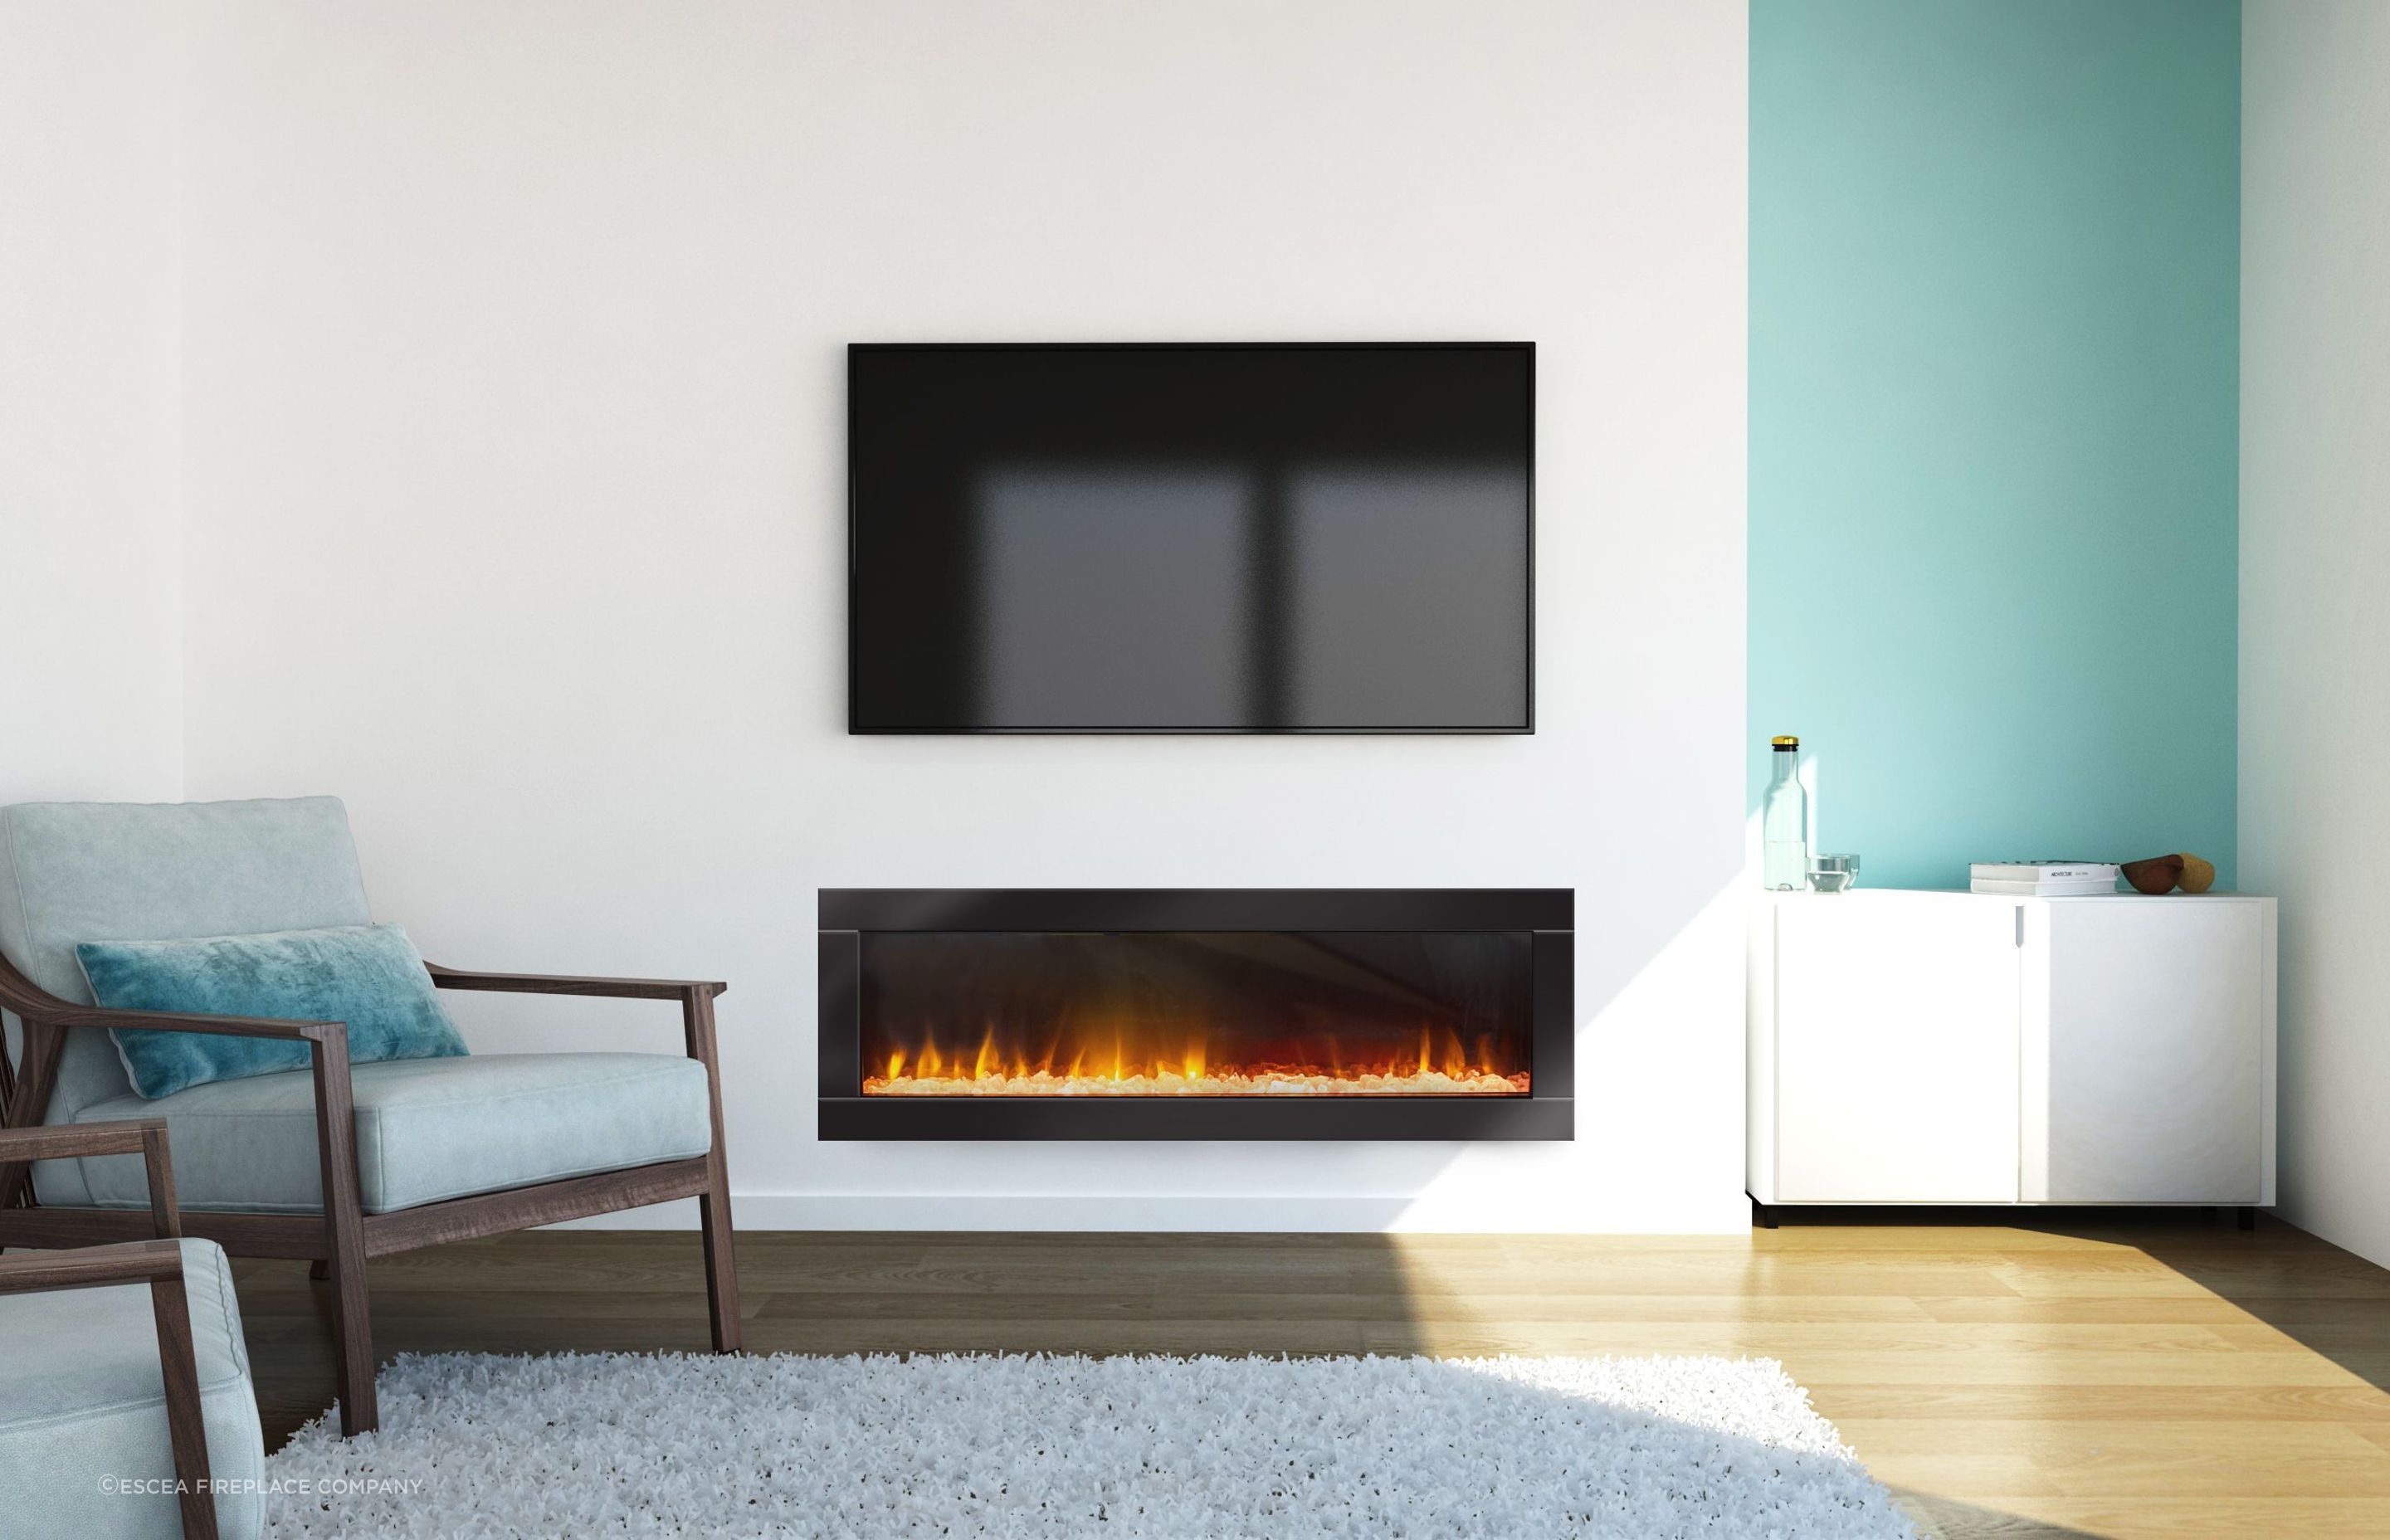 Easy installation, no maintenance and safe to touch - the Ambe Linear50 Electric Fireplace makes a great addition to the family home